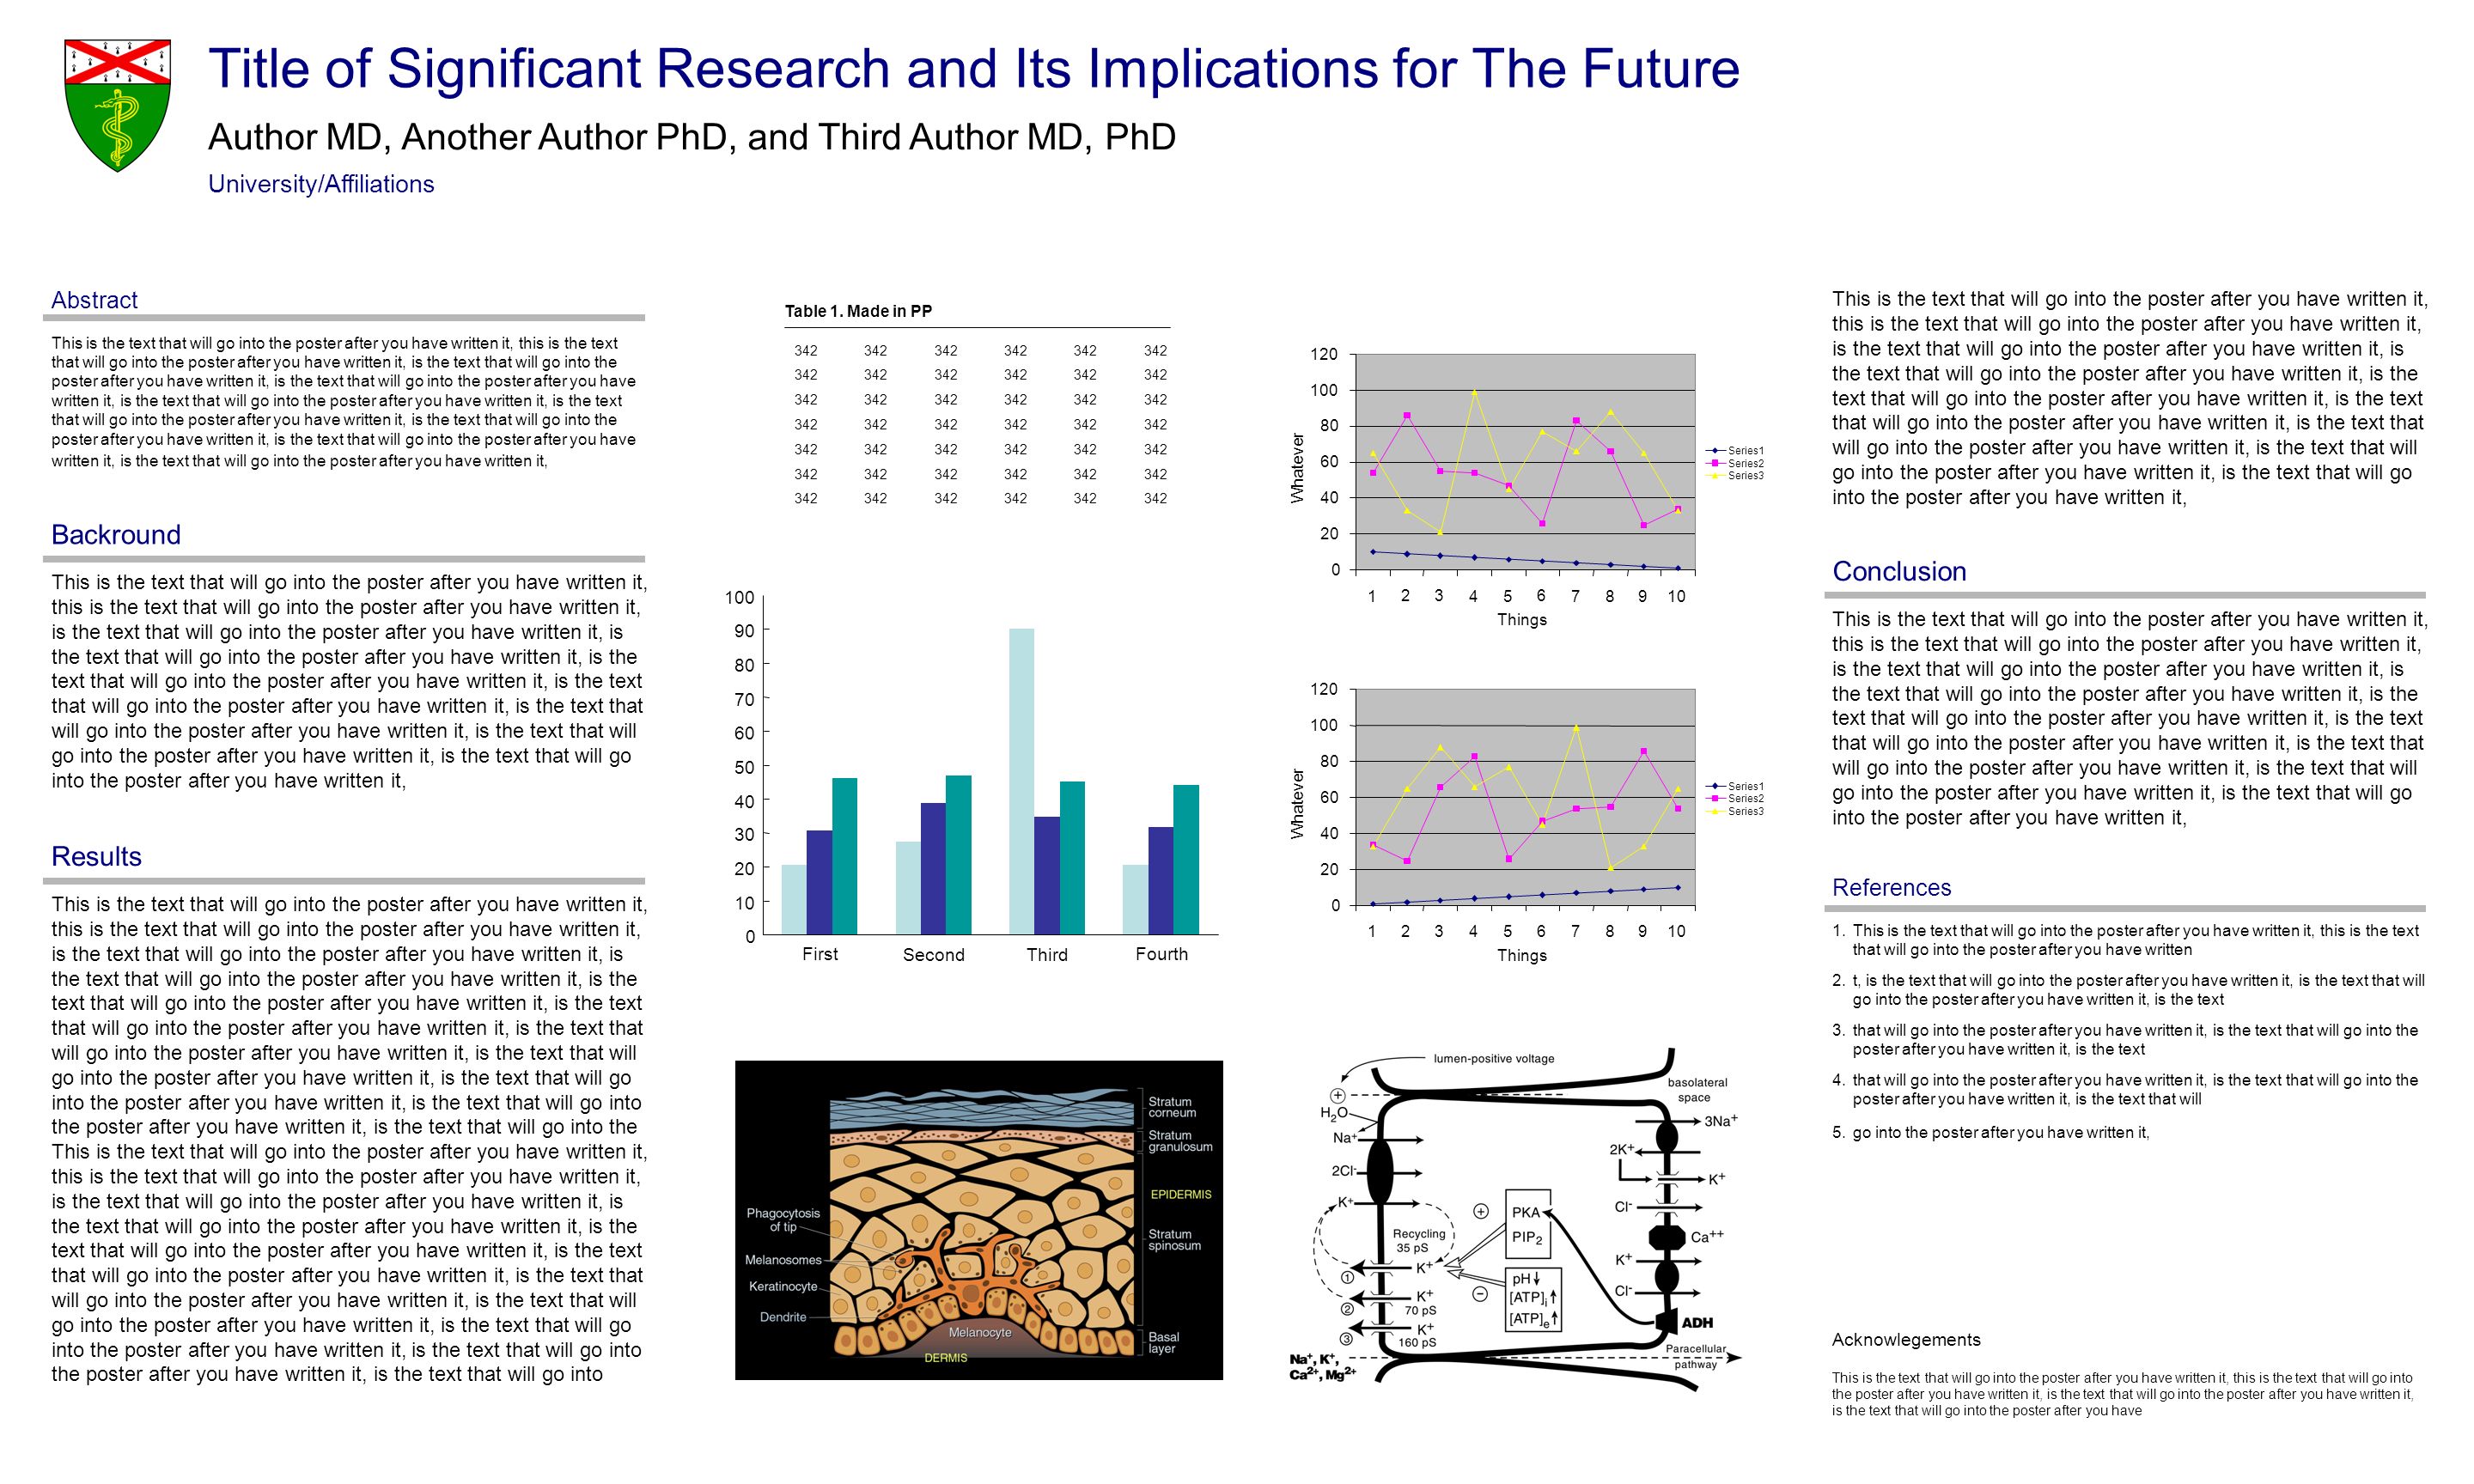 Title of Significant Research and Its Implications for The Future University/Affiliations Author MD, Another Author PhD, and Third Author MD, PhD Abstract This is the text that will go into the poster after you have written it, this is the text that will go into the poster after you have written it, is the text that will go into the poster after you have written it, is the text that will go into the poster after you have written it, is the text that will go into the poster after you have written it, is the text that will go into the poster after you have written it, is the text that will go into the poster after you have written it, is the text that will go into the poster after you have written it, is the text that will go into the poster after you have written it, Backround This is the text that will go into the poster after you have written it, this is the text that will go into the poster after you have written it, is the text that will go into the poster after you have written it, is the text that will go into the poster after you have written it, is the text that will go into the poster after you have written it, is the text that will go into the poster after you have written it, is the text that will go into the poster after you have written it, is the text that will go into the poster after you have written it, is the text that will go into the poster after you have written it, Conclusion This is the text that will go into the poster after you have written it, this is the text that will go into the poster after you have written it, is the text that will go into the poster after you have written it, is the text that will go into the poster after you have written it, is the text that will go into the poster after you have written it, is the text that will go into the poster after you have written it, is the text that will go into the poster after you have written it, is the text that will go into the poster after you have written it, is the text that will go into the poster after you have written it, References 1.This is the text that will go into the poster after you have written it, this is the text that will go into the poster after you have written 2.t, is the text that will go into the poster after you have written it, is the text that will go into the poster after you have written it, is the text 3.that will go into the poster after you have written it, is the text that will go into the poster after you have written it, is the text 4.that will go into the poster after you have written it, is the text that will go into the poster after you have written it, is the text that will 5.go into the poster after you have written it, First SecondThird Fourth Table 1.